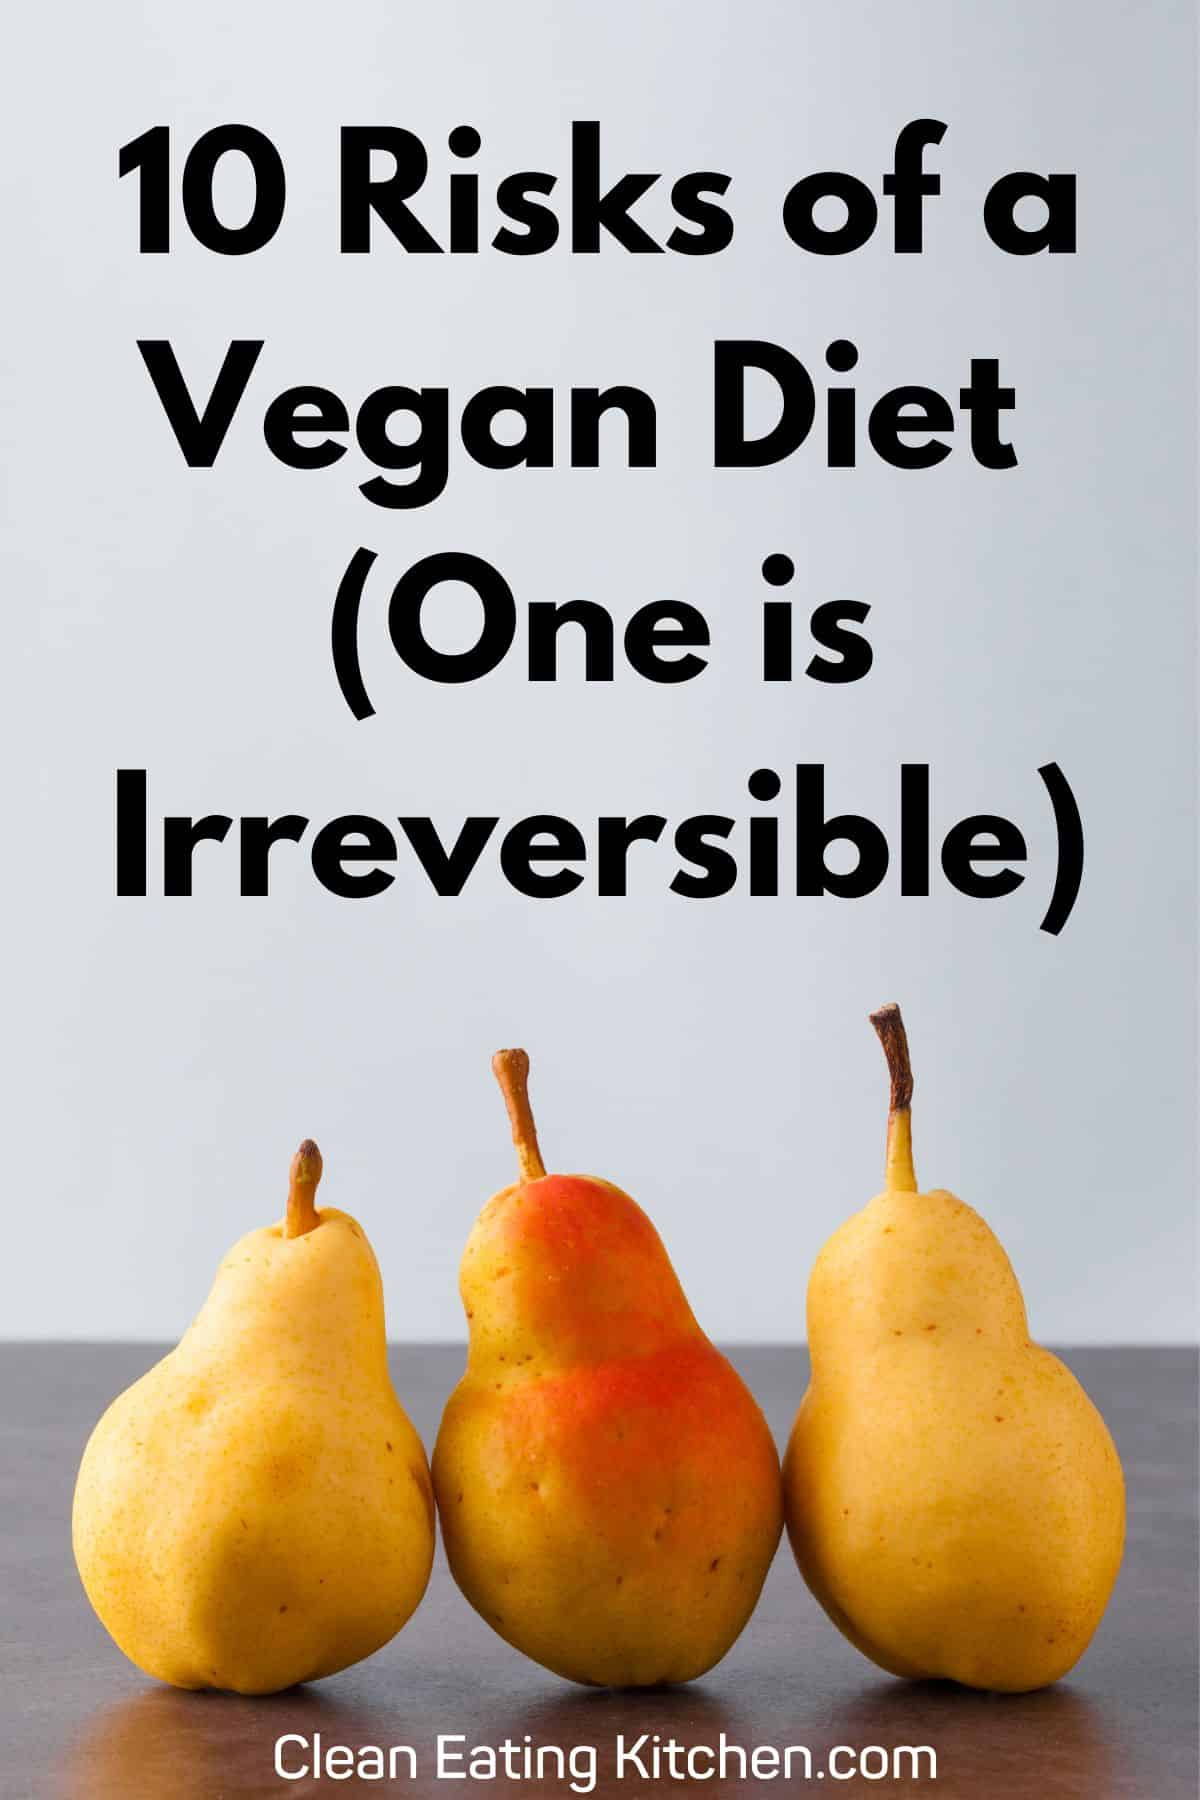 Unsafe practices in extreme vegan diets